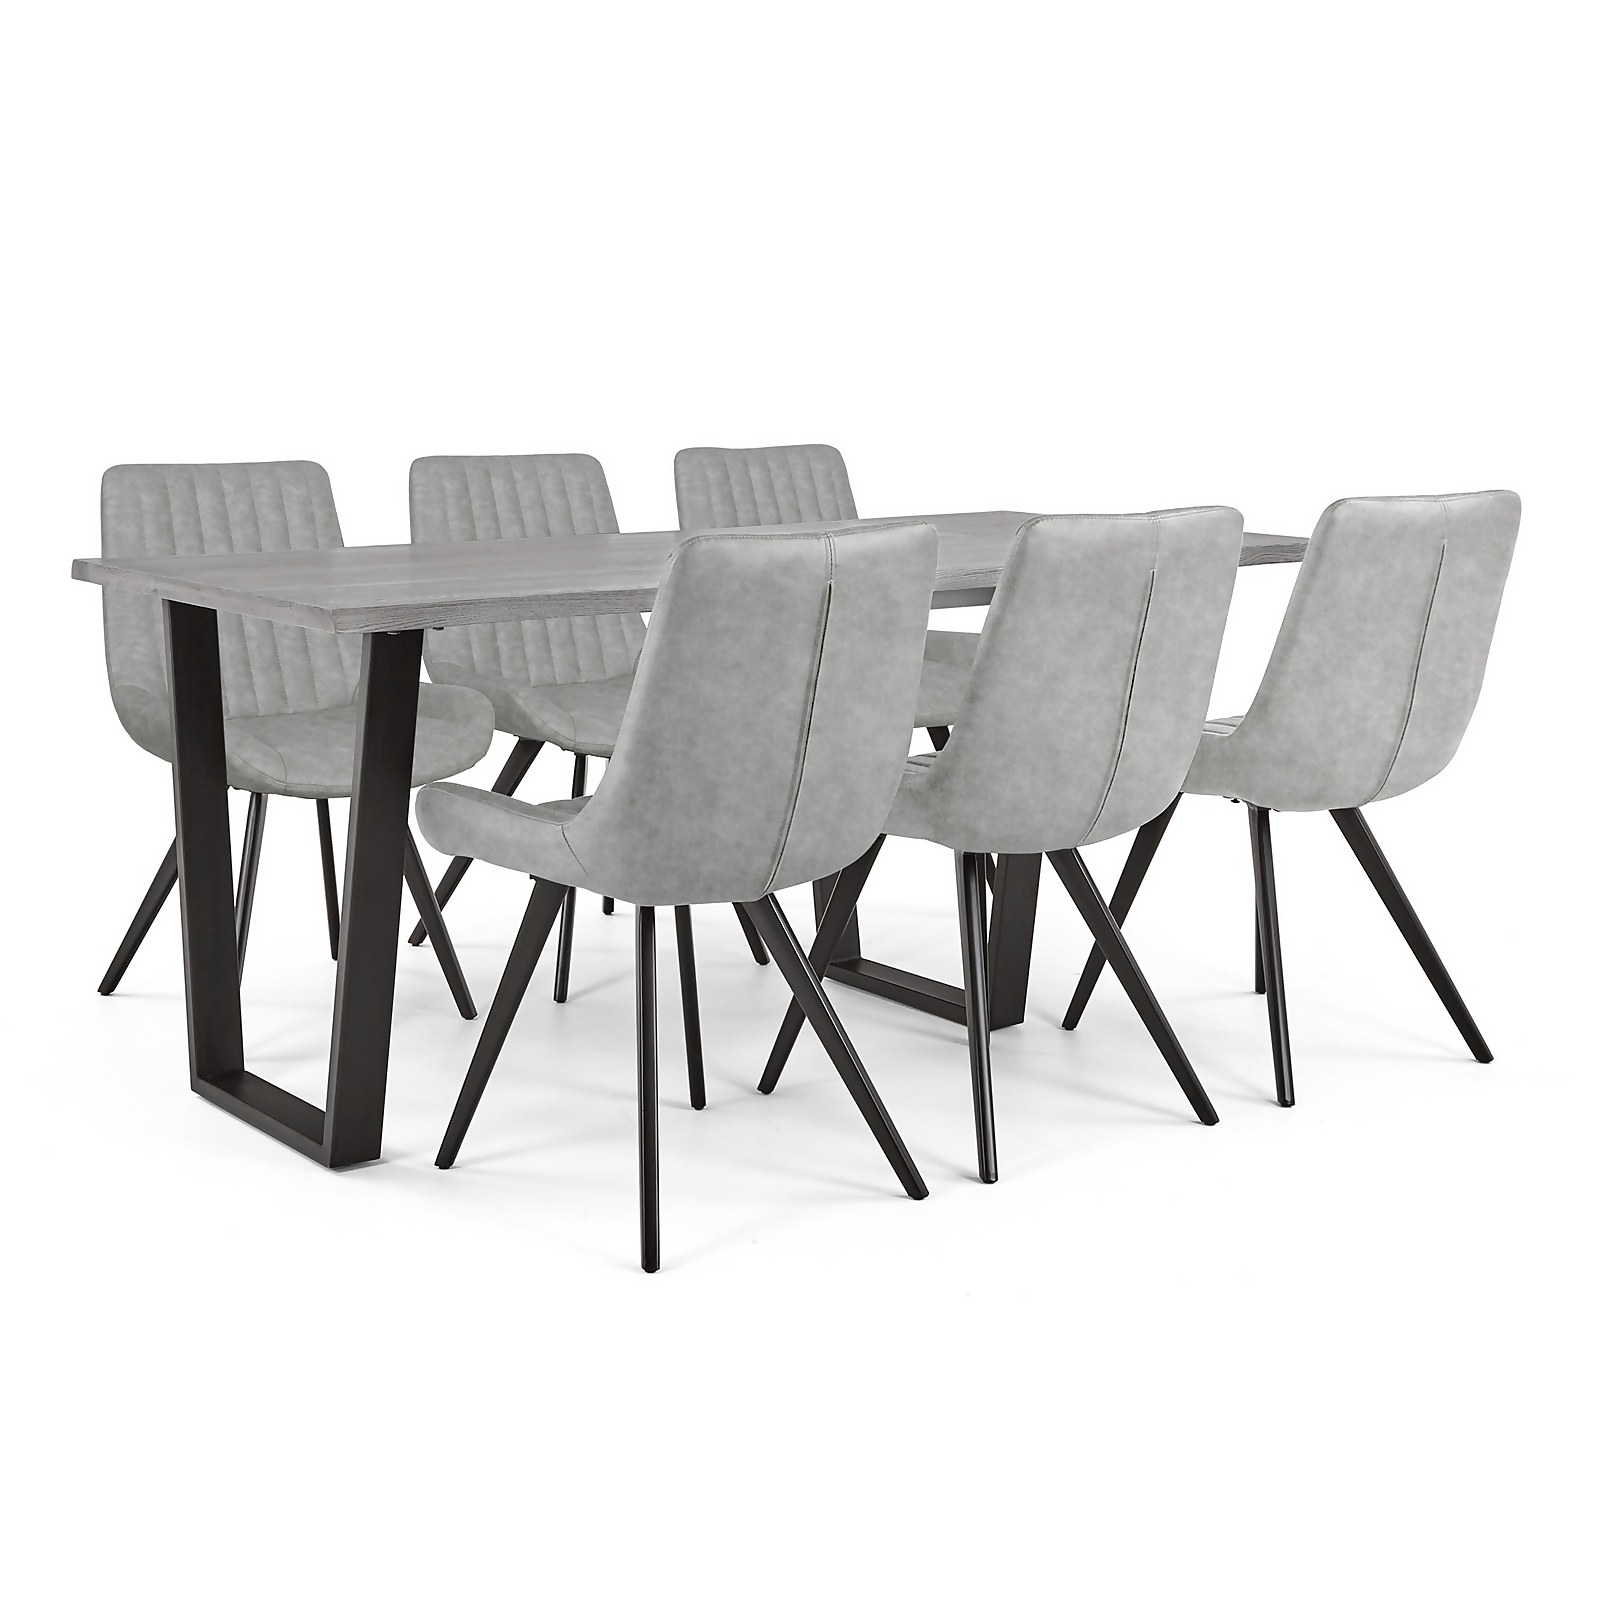 Photo of Dalston Dining Table And 6 Chairs - Silver